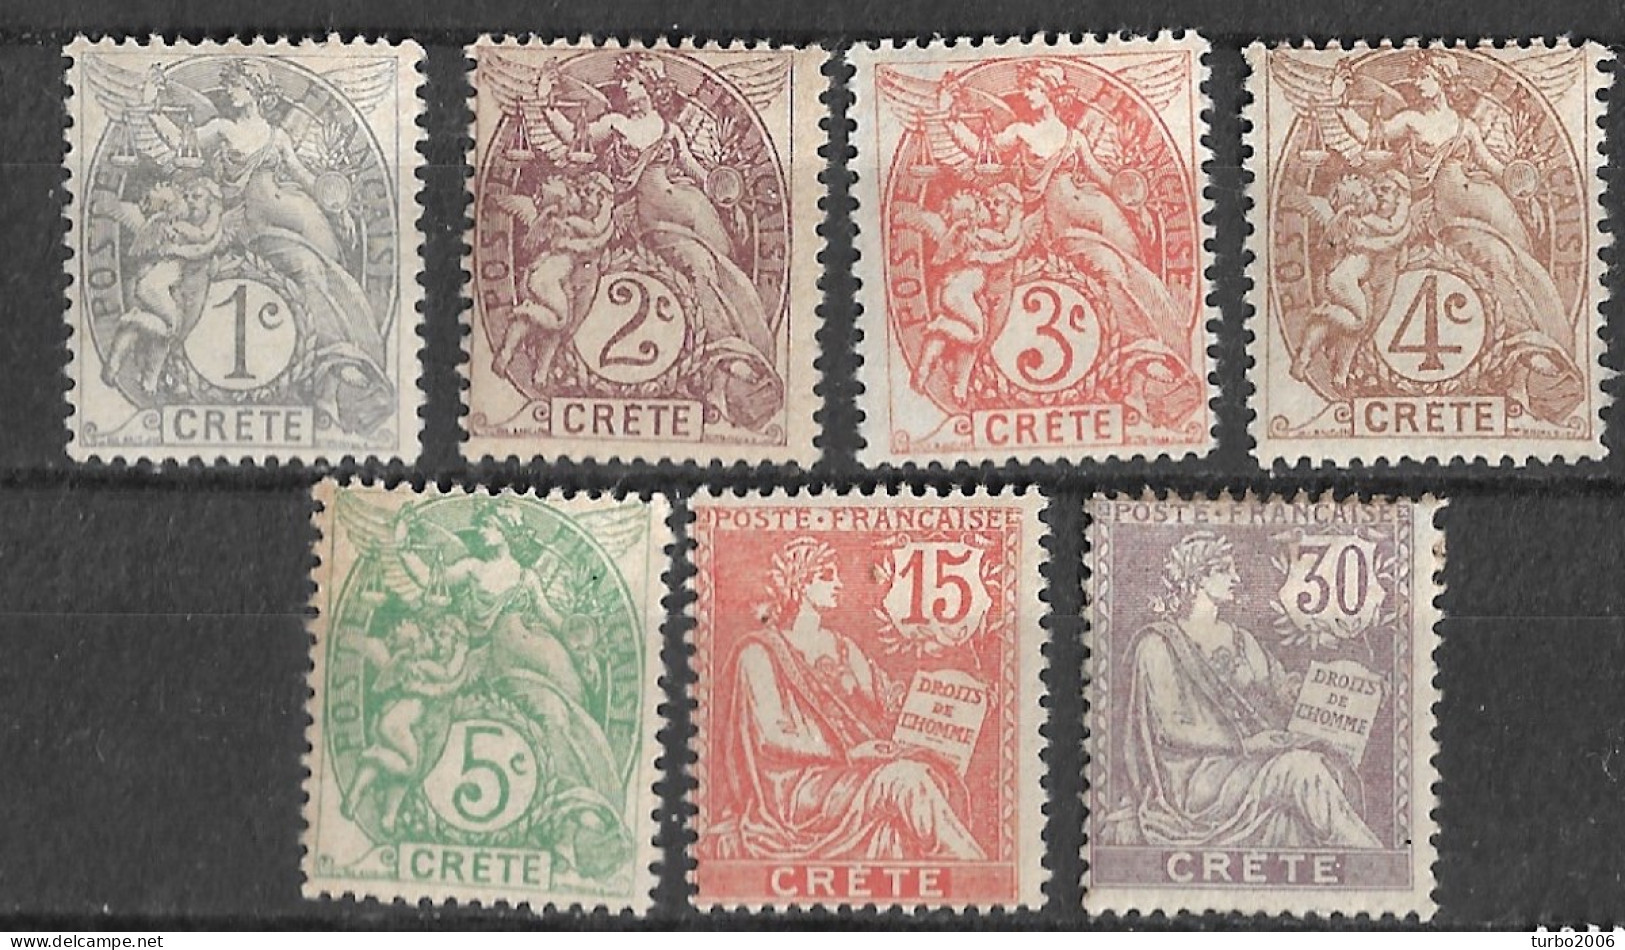 CRETE 1902 French Office : Stamps Of 1900 With Inscription CRETE 7 Values From The Set  Vl. 1 / 5 - 7 - 10 MH - Crète